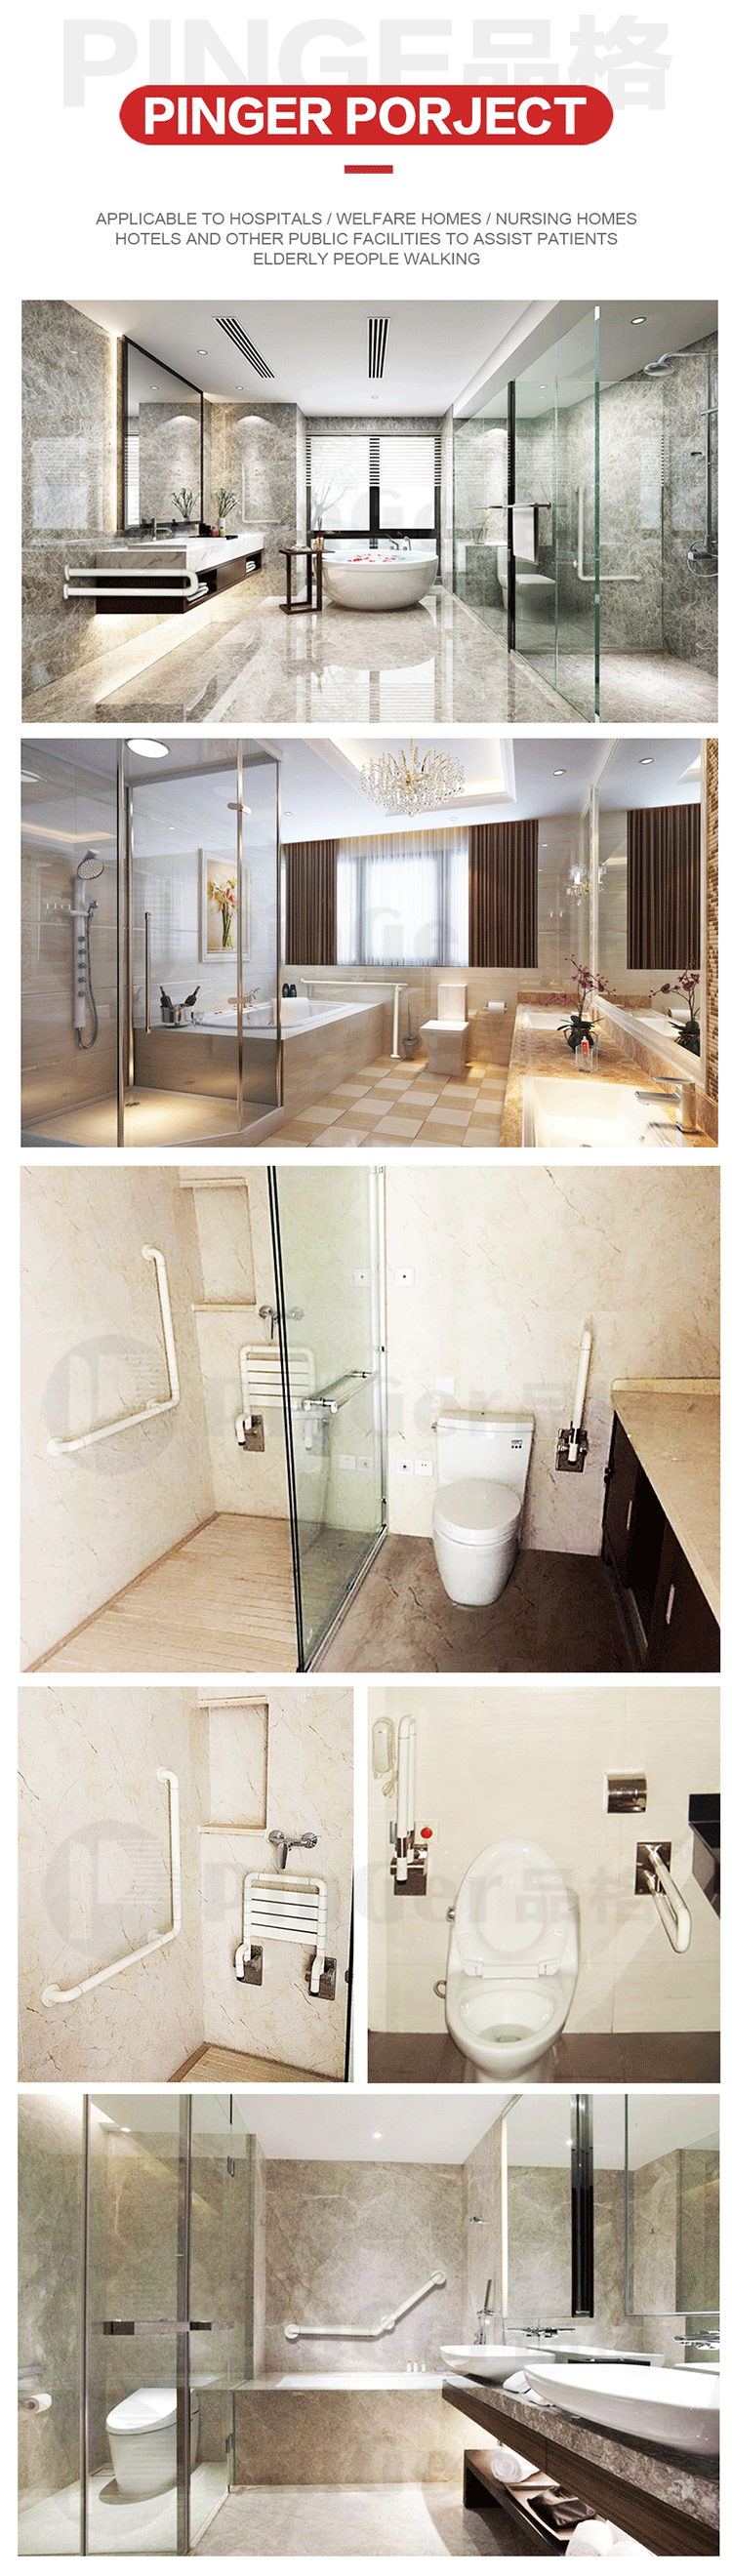 Safety Nylon Rails For Bathrooms Accessories